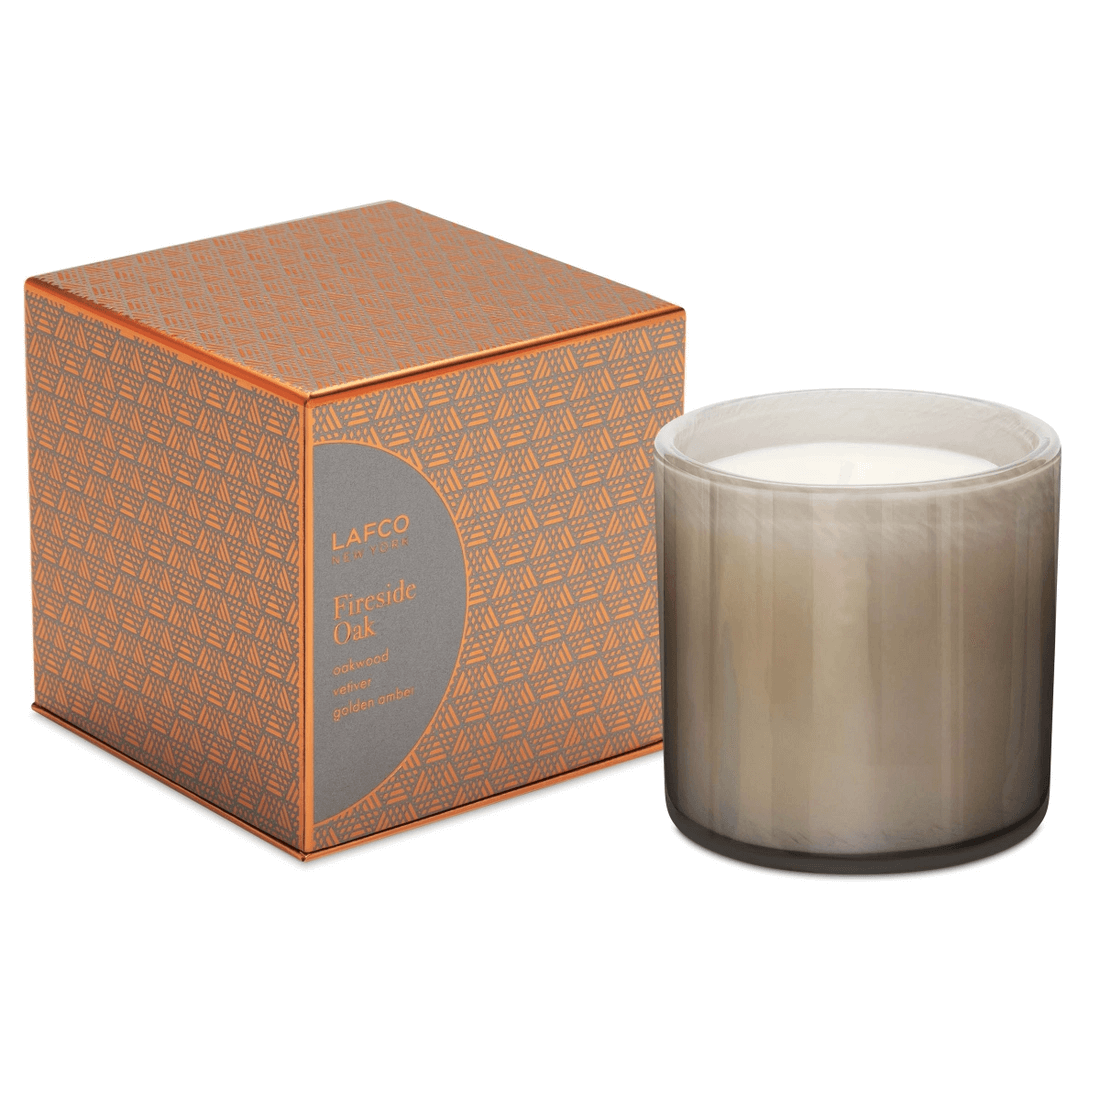 Fireside Oak Candle by LAFCO